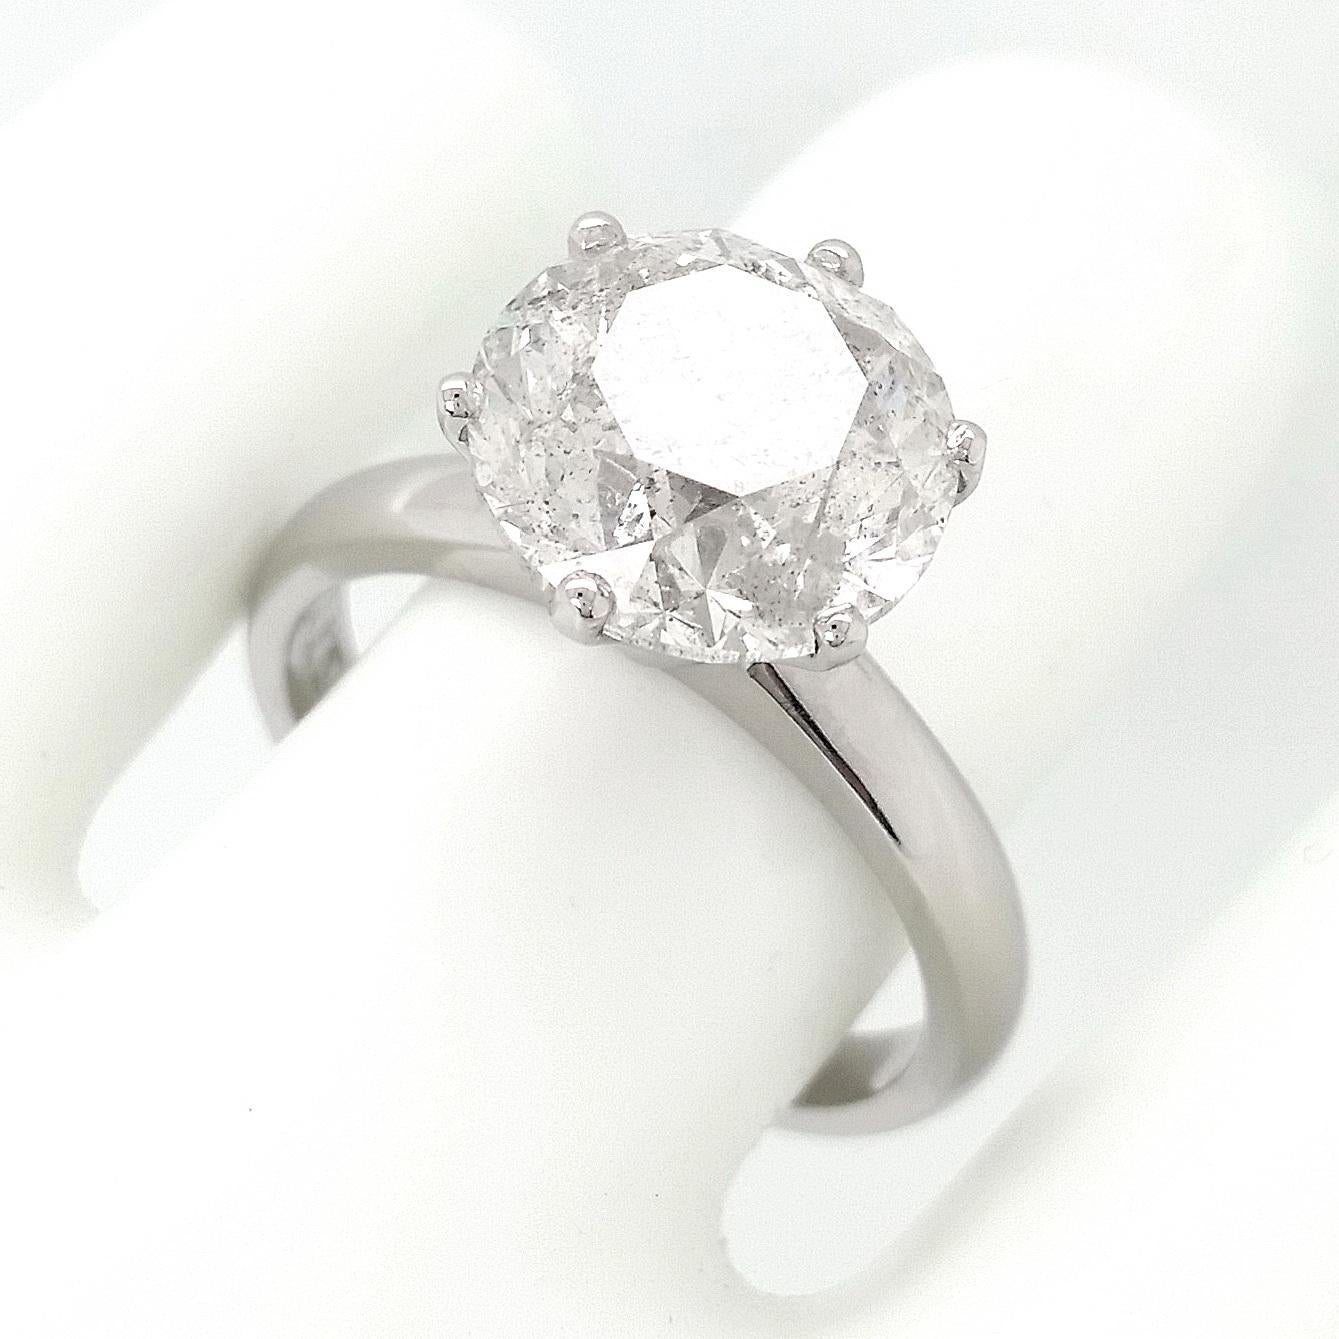 FOR U.S. BUYERS NO VAT 

This elegant and exquisite 14k white gold ring showcases a delicate design with its gorgeous and sparkling round brilliant diamond that weighs 5.04 carats. This breathtaking ring will eternally win your heart.
For more